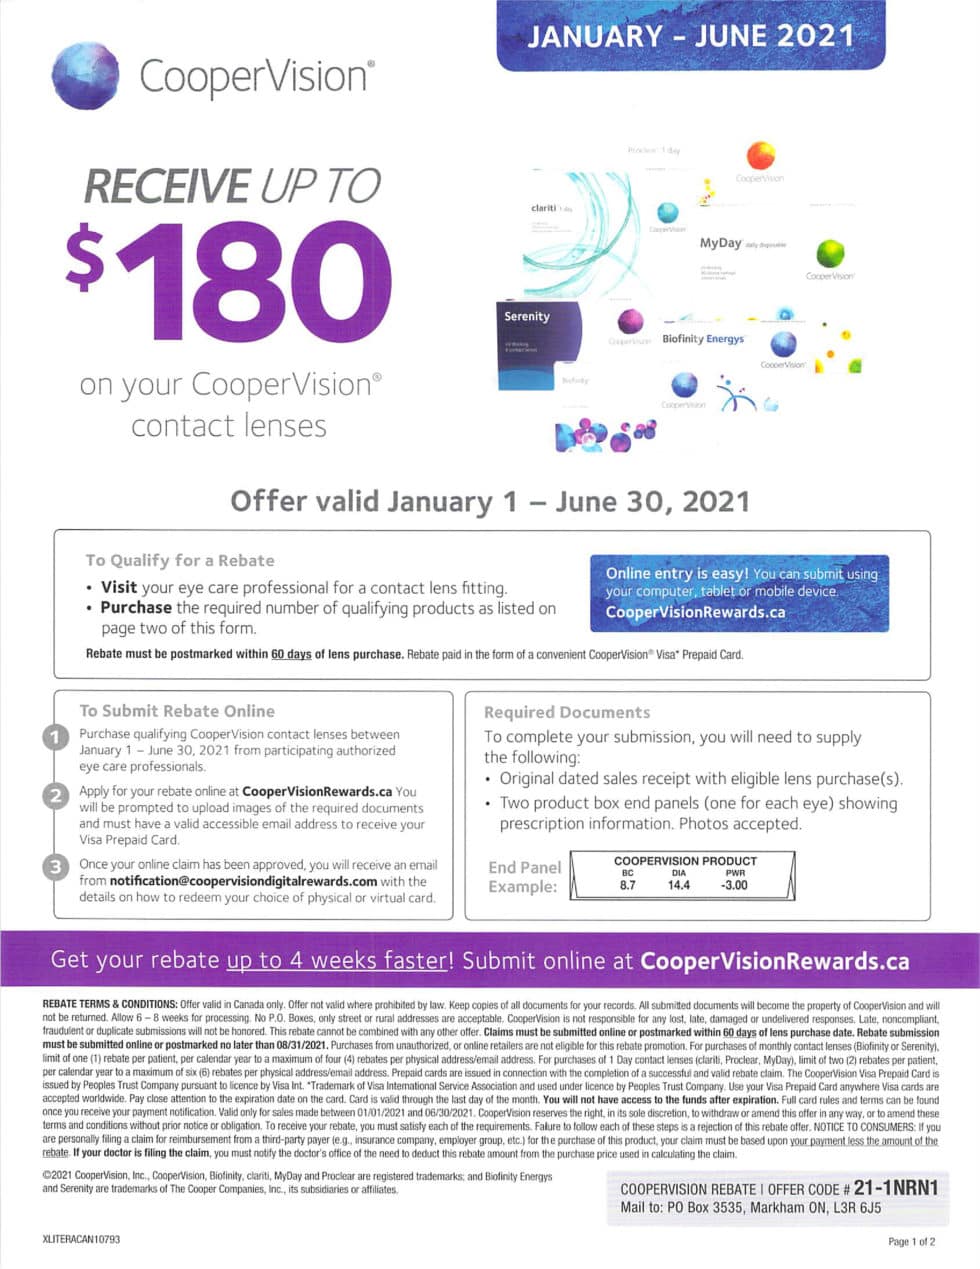 coopervision-rebates-coopervision